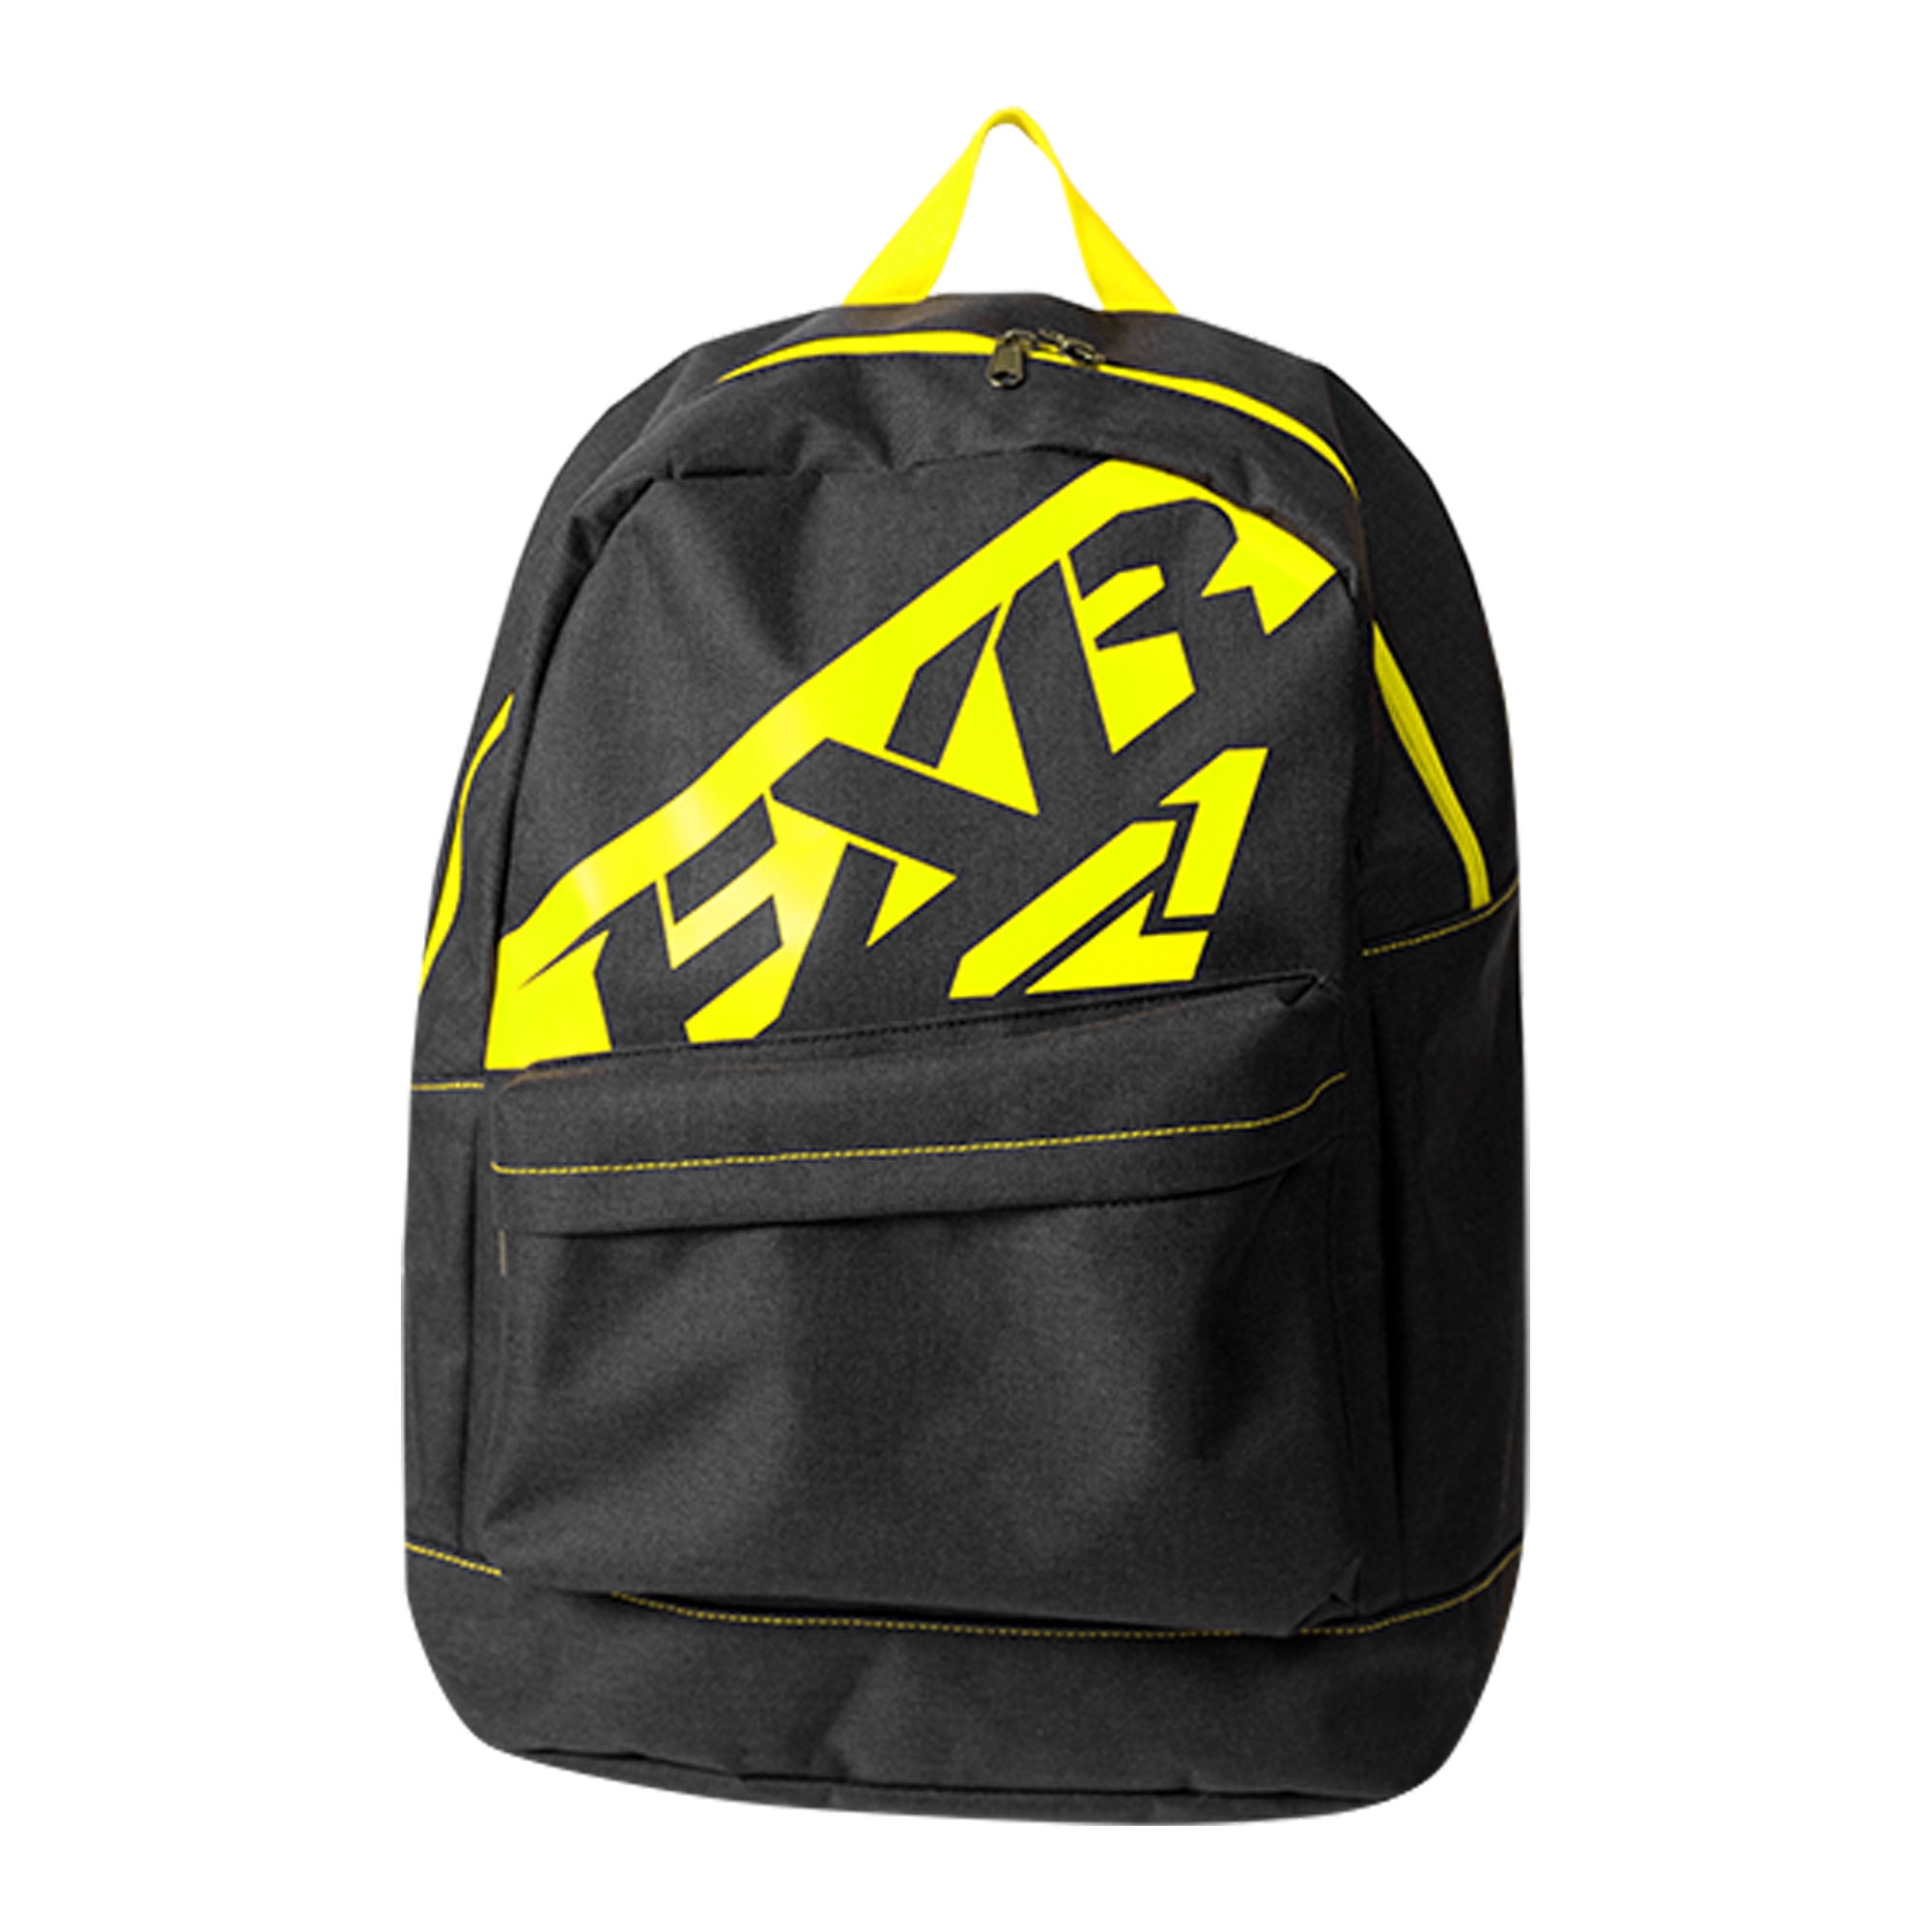 FXR Holeshot Bag Authentic Computer Pouch Waterproof Lifestyle MX  Snowmobile - Char 183201-0865-00